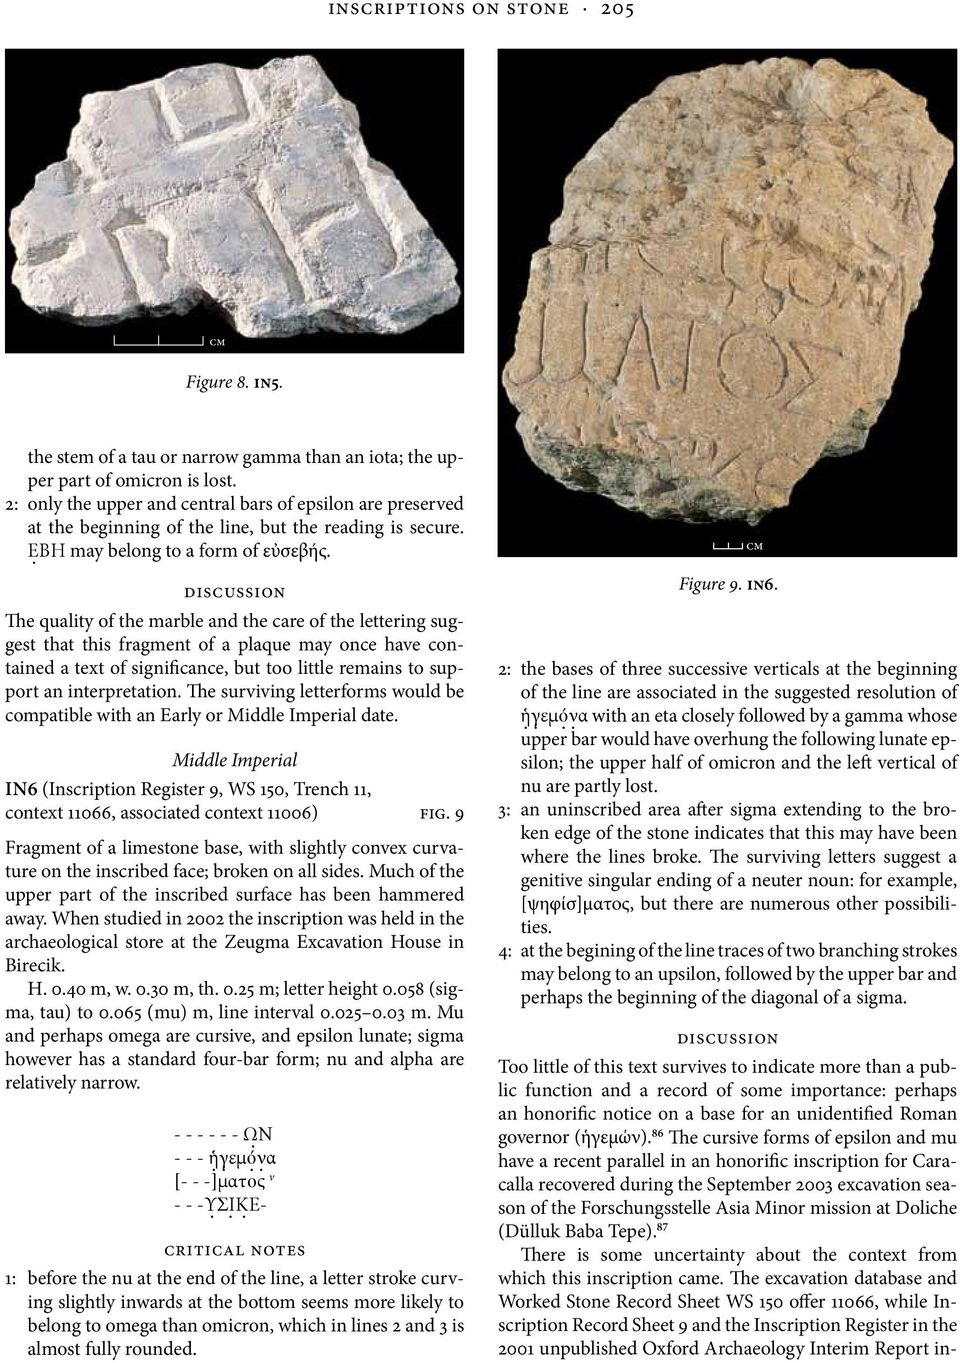 The quality of the marble and the care of the lettering suggest that this fragment of a plaque may once have contained a text of significance, but too little remains to support an interpretation.